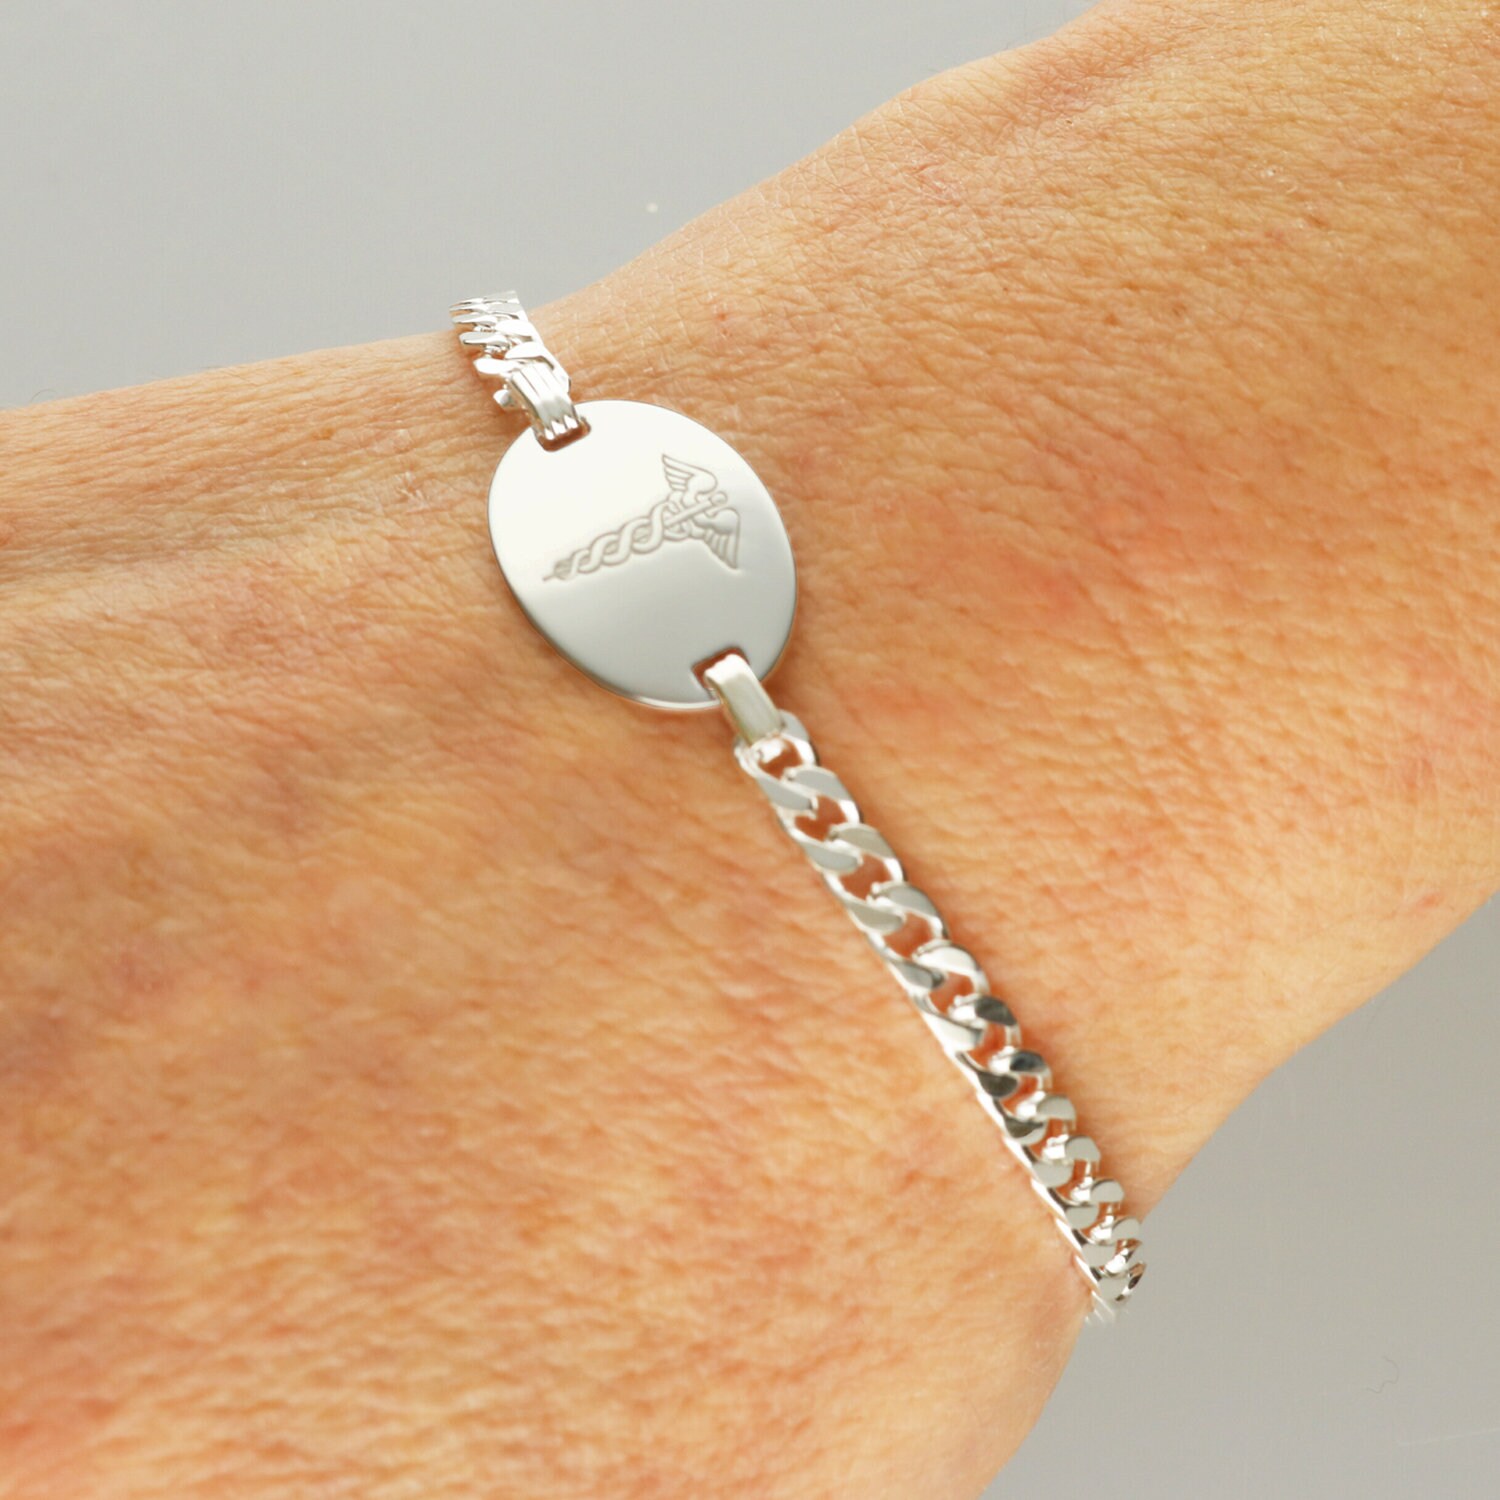 One Day at a Time Silver One Day at a Time Bracelet Sieraden Armbanden ID- & Medische armbanden 